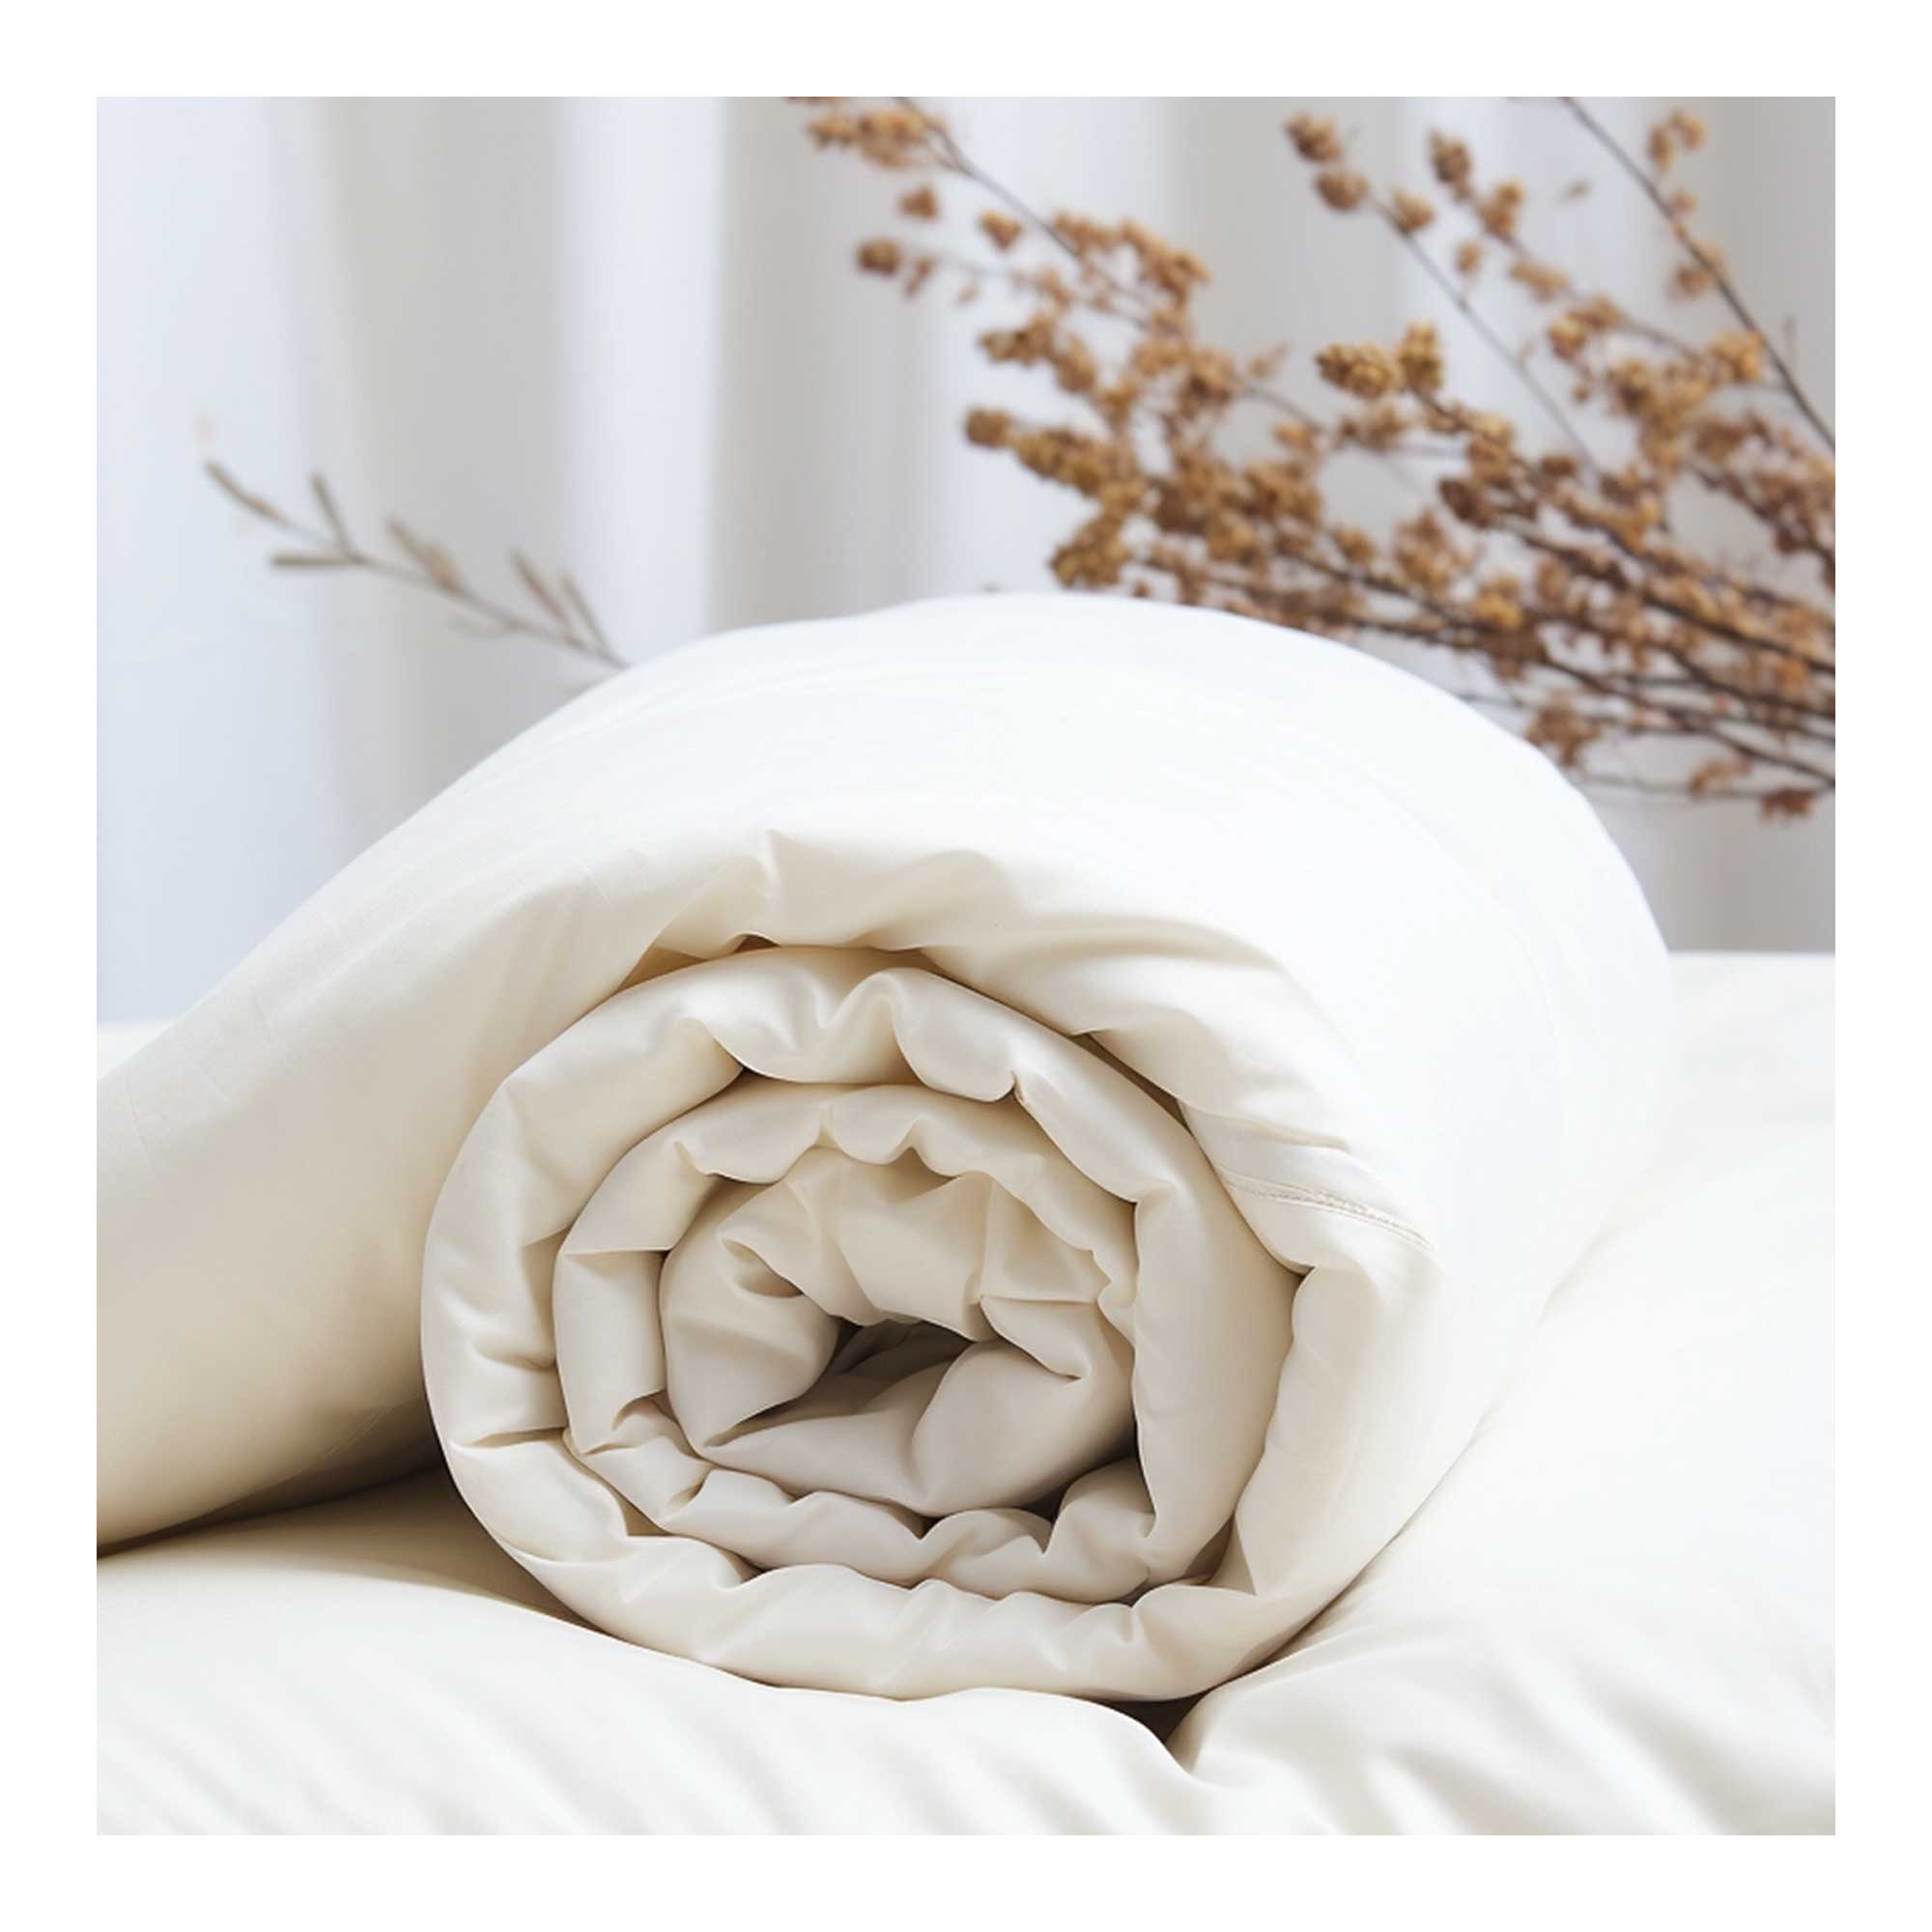 Artistic shot of the Devon Closewool wool duvet with a focus on its plush texture.